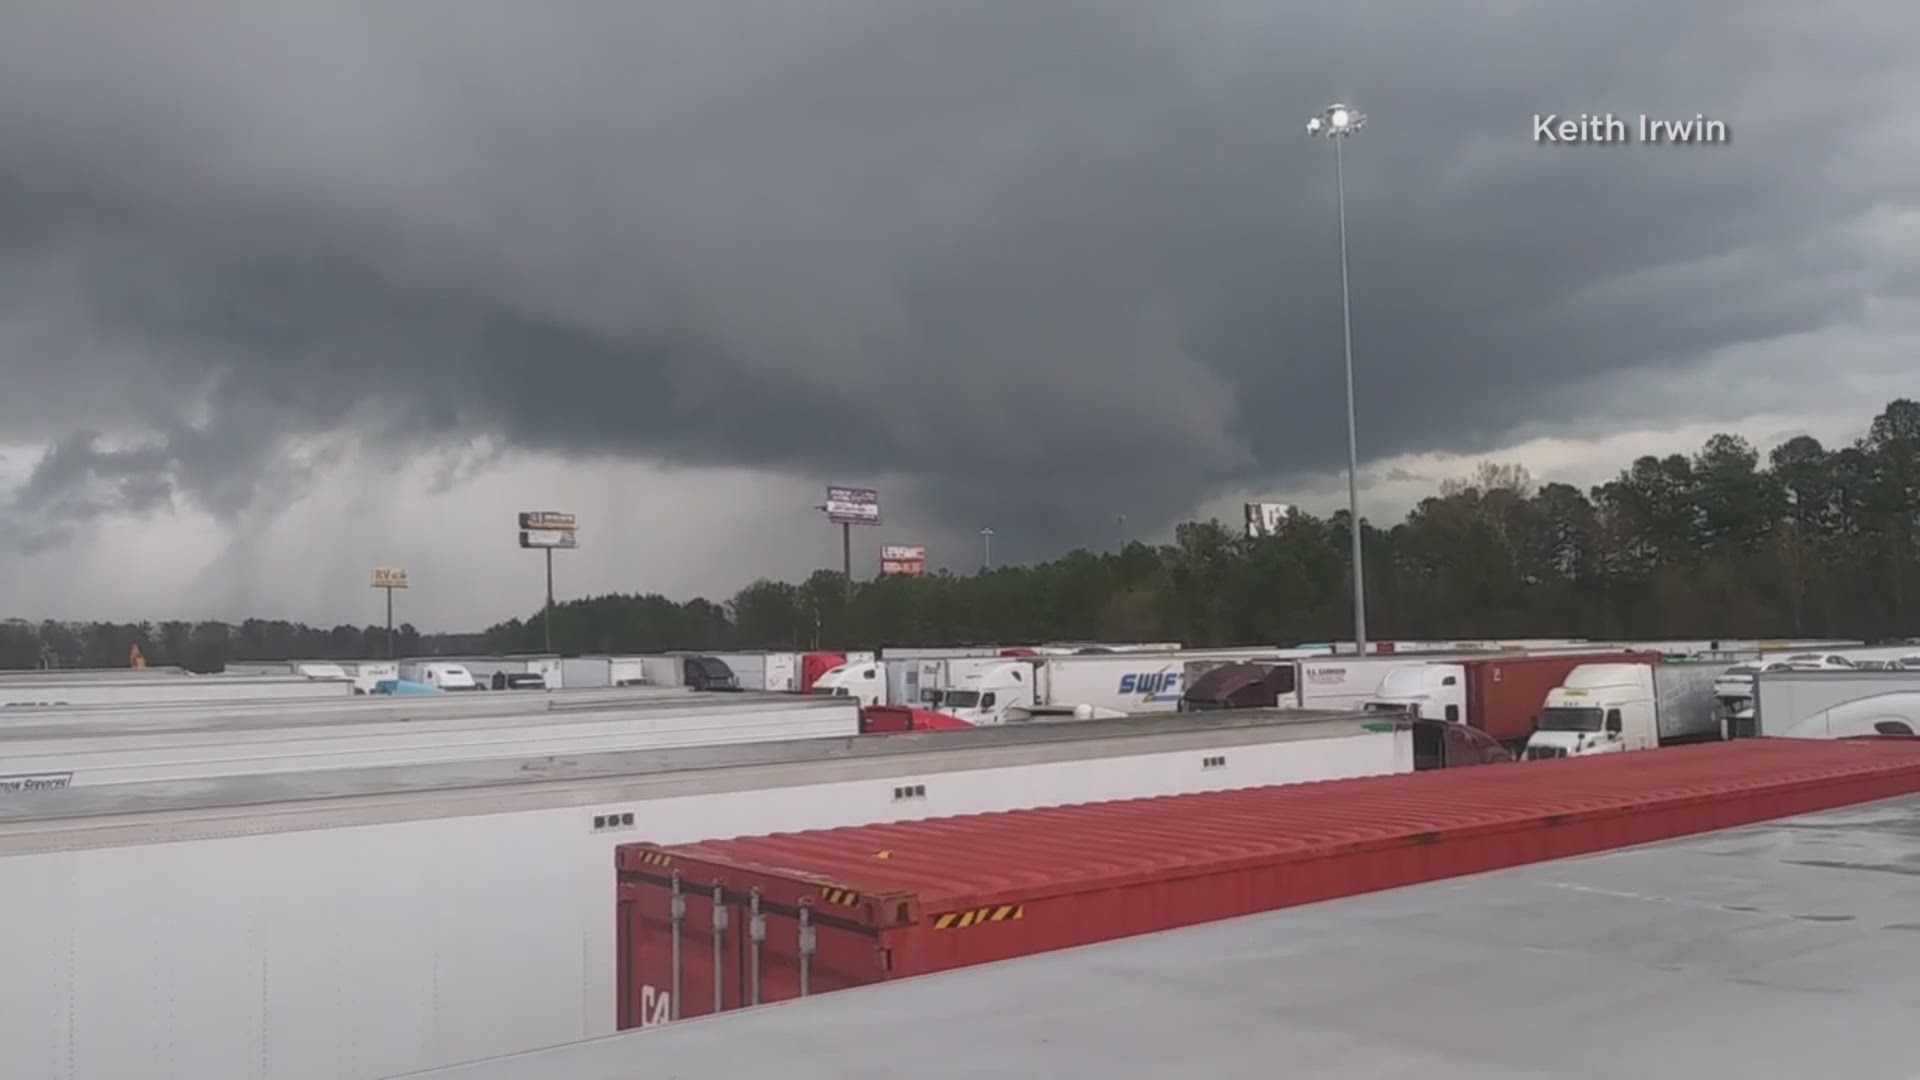 The large southeast tornado outbreak on March 3, 2019 led to multiple tornadoes, including this apparent tornado in Warner Robins, GA. Keith Irwin captured this video.